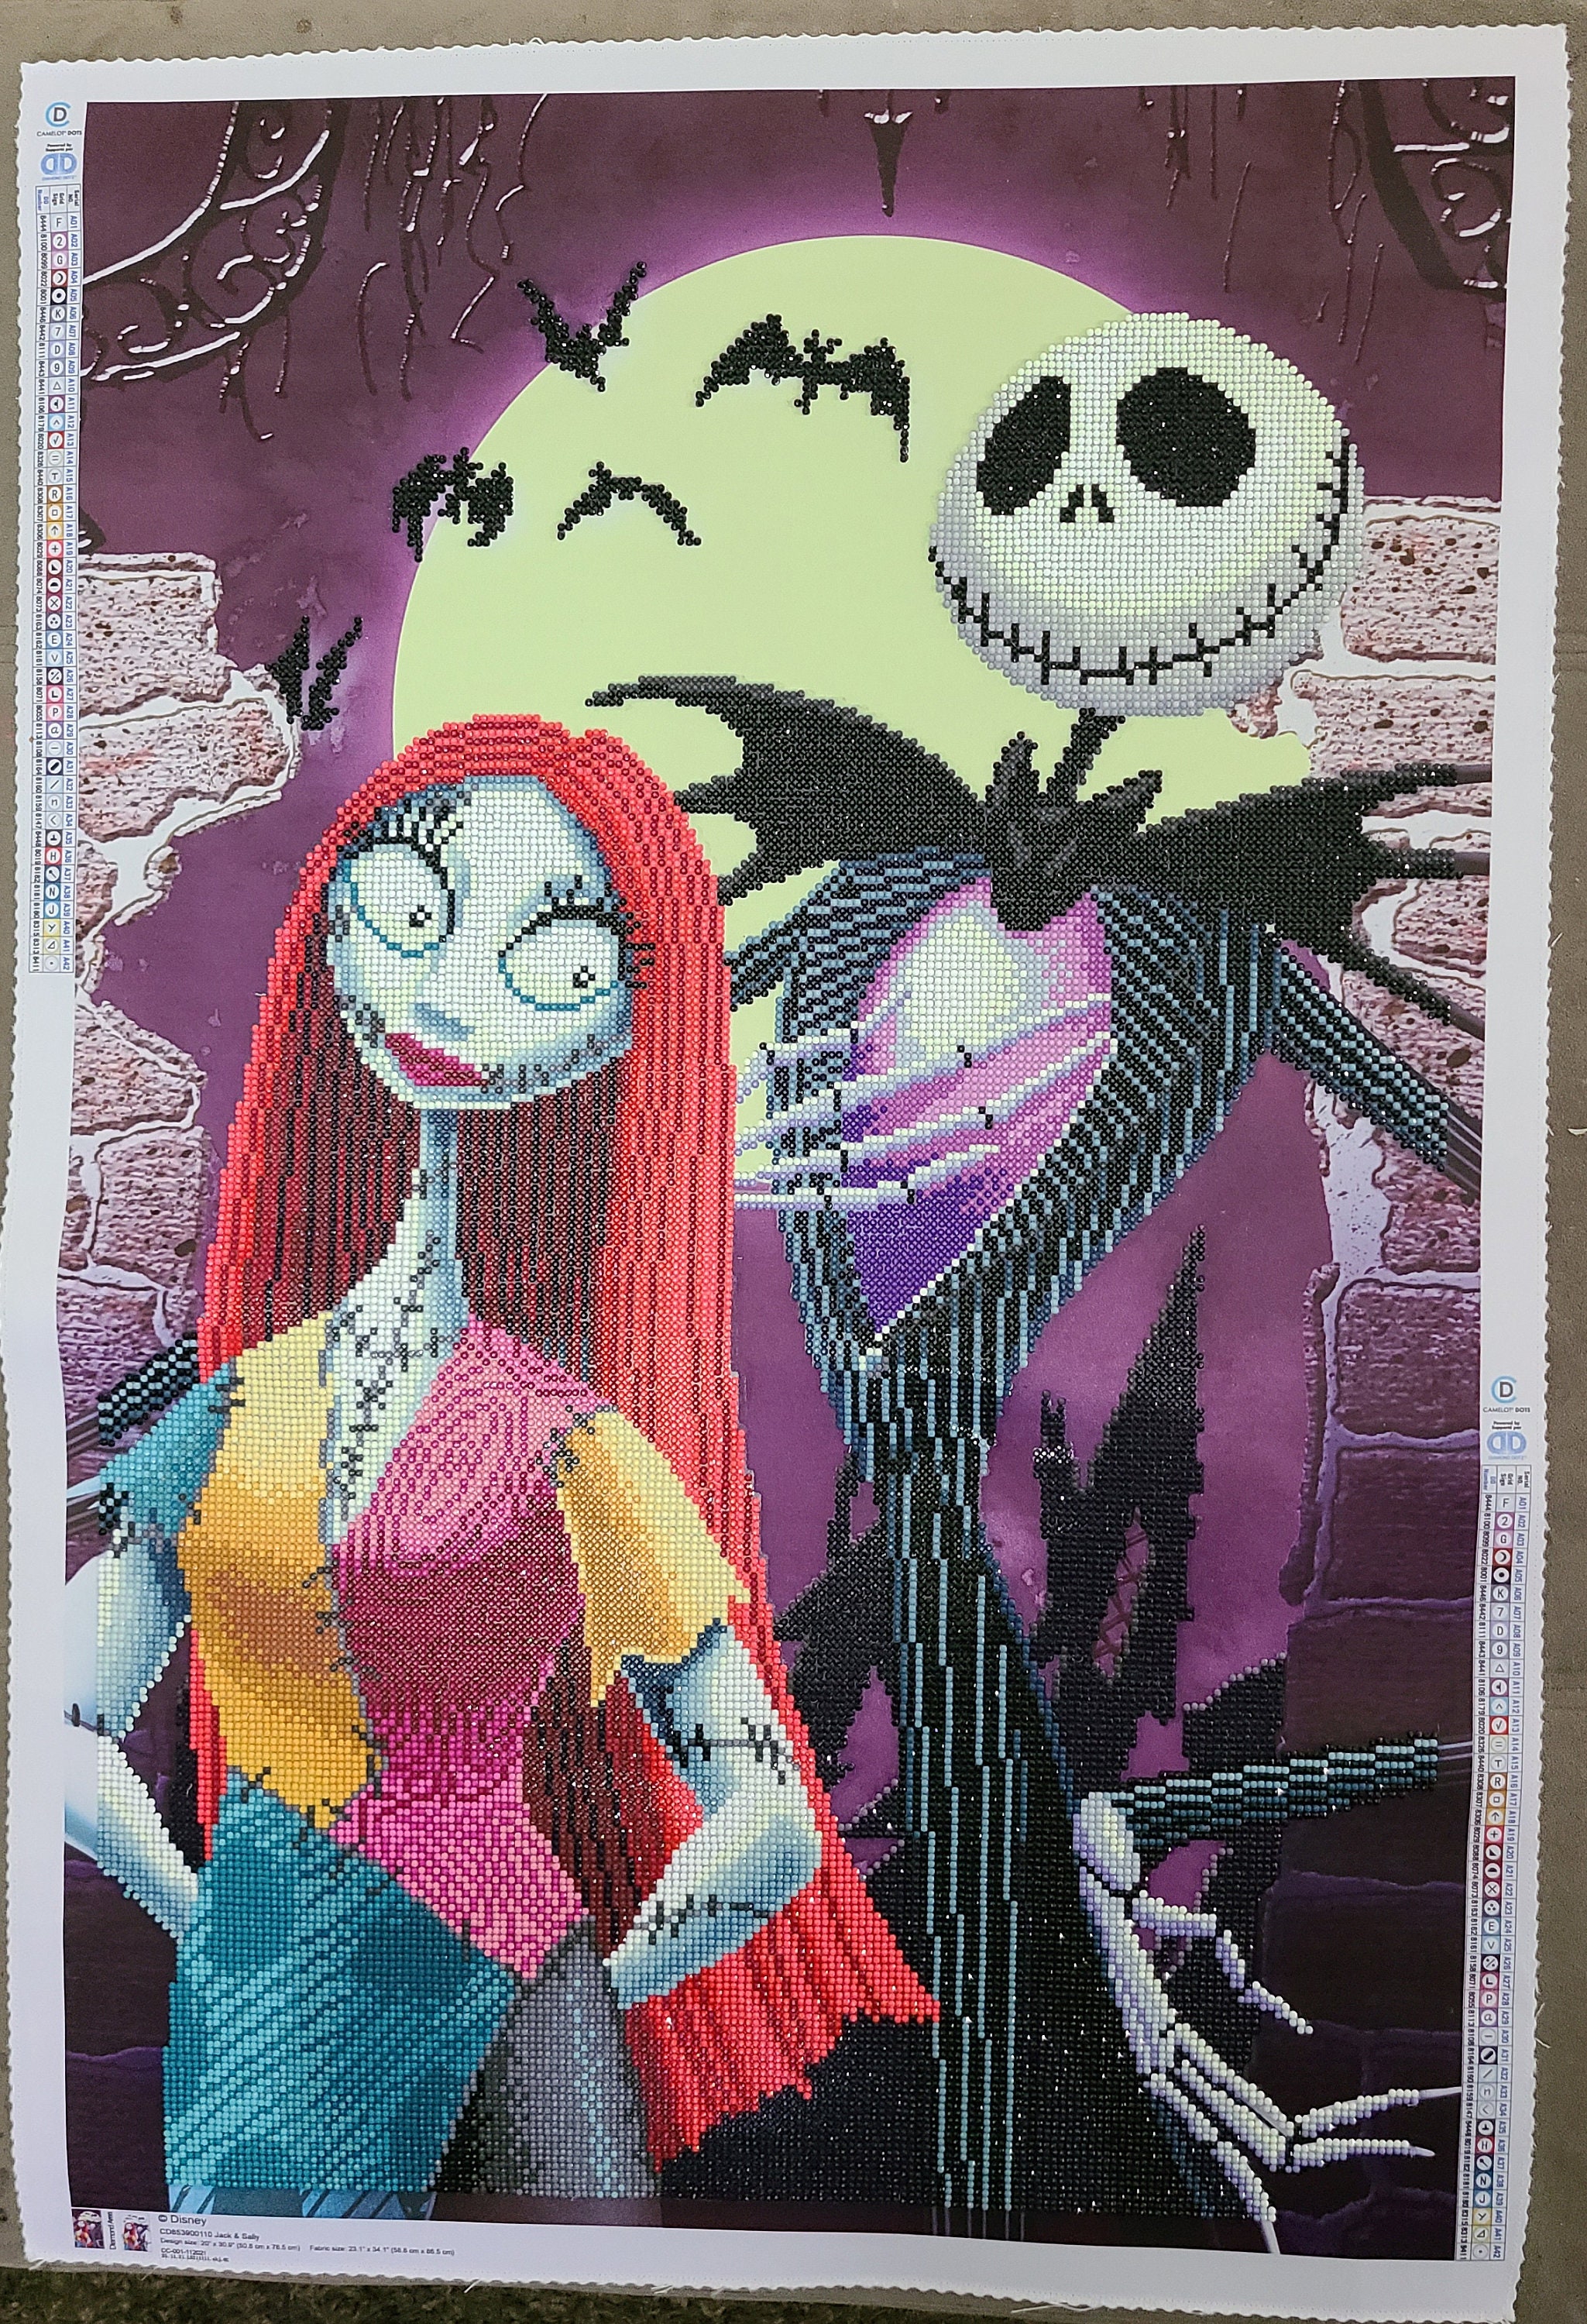 DIY Diamond Painting Jack and Sally Halloween 12x16inch, Full Round Drill Kits The Nightmare Before Christmas Cross Stitch Mosaic Art for Adults Relax